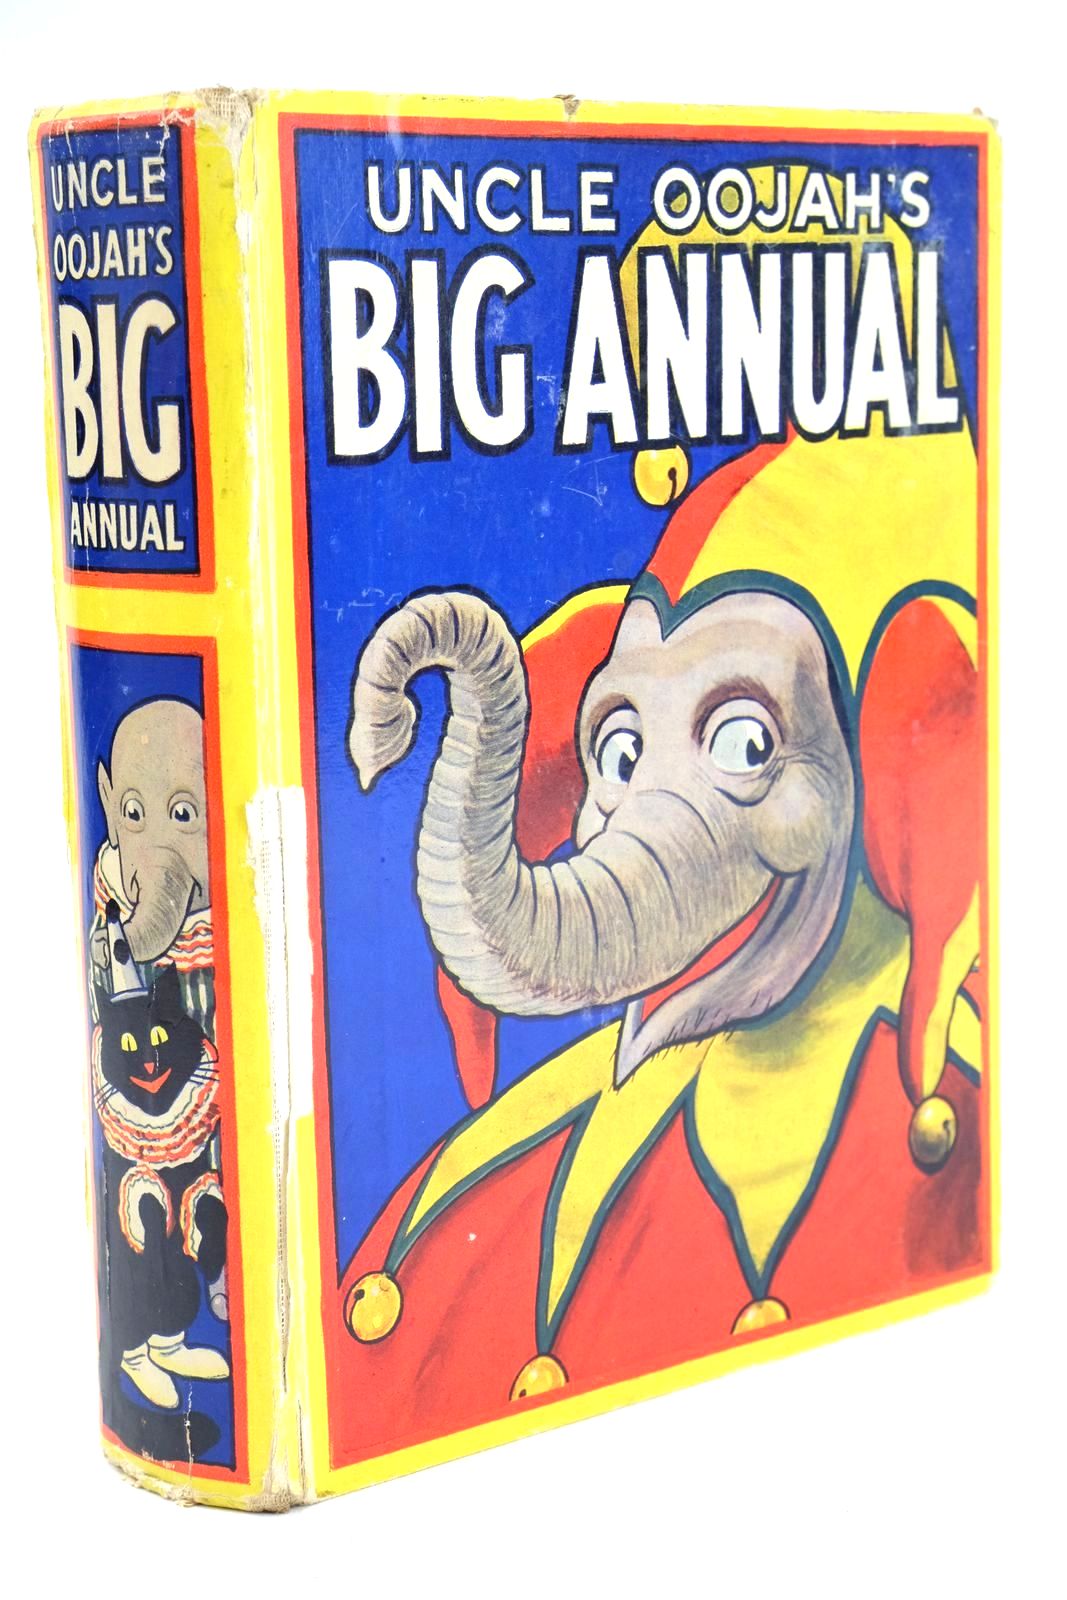 Photo of UNCLE OOJAH'S BIG ANNUAL written by Lancaster, Flo Leonard, Bertha Fry, Leonora et al, illustrated by Heath, Irene Buchanan, Lilian Paterson, Cora et al., published by Allied Newspapers Limited (STOCK CODE: 1324792)  for sale by Stella & Rose's Books